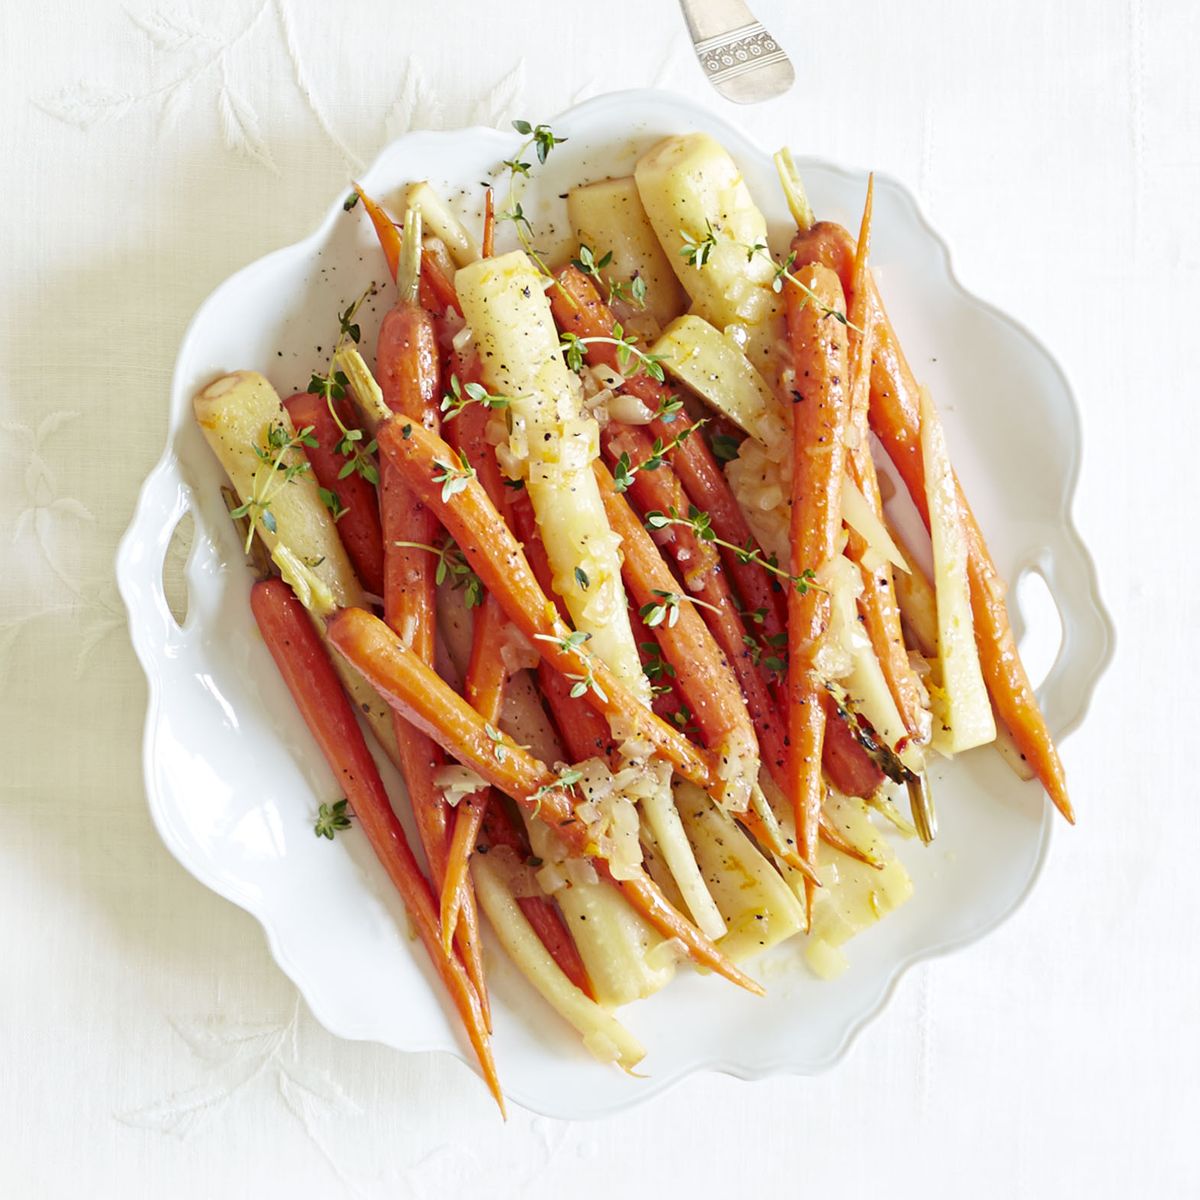 orange braised carrots and parsnips